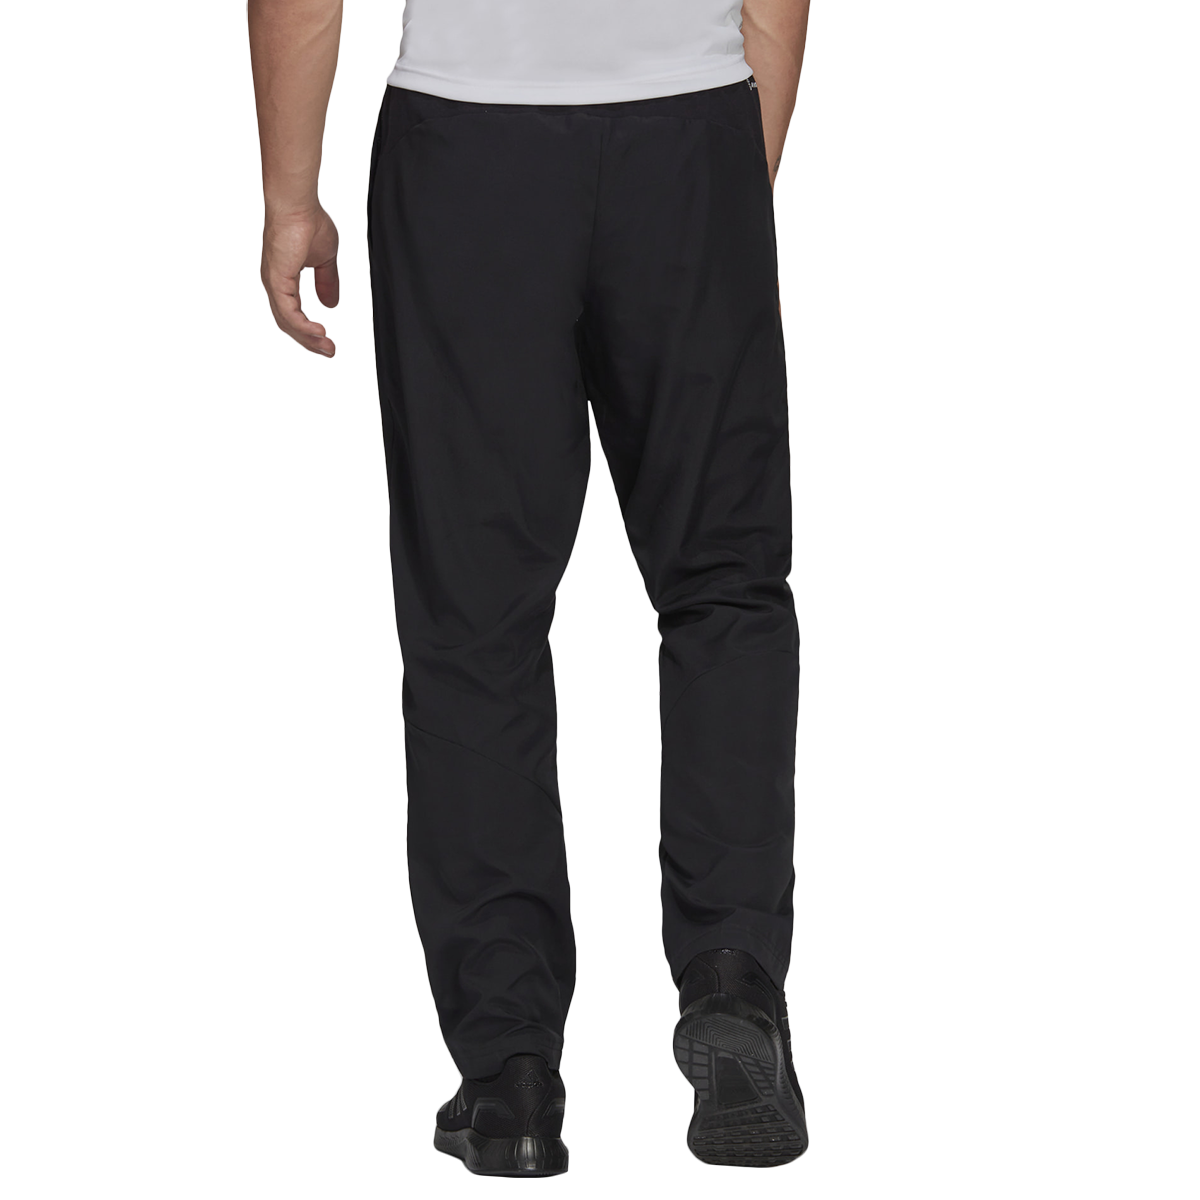 Men's Designed To Move Woven Pant alternate view